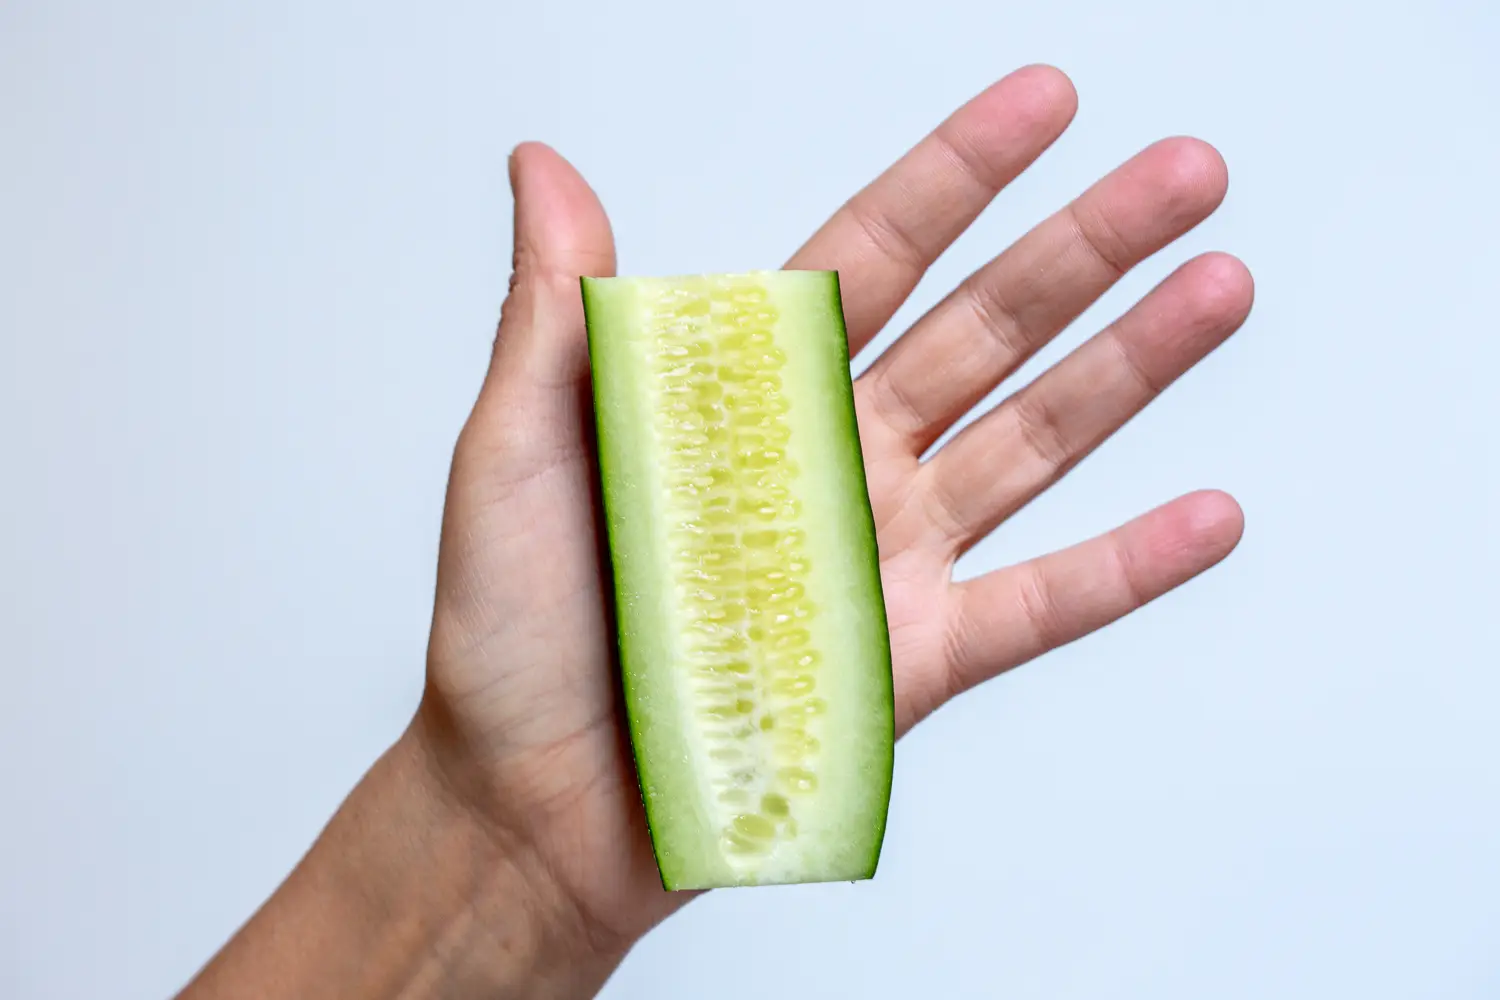 a photograph of a hand holding a cucumber halved lengthwise